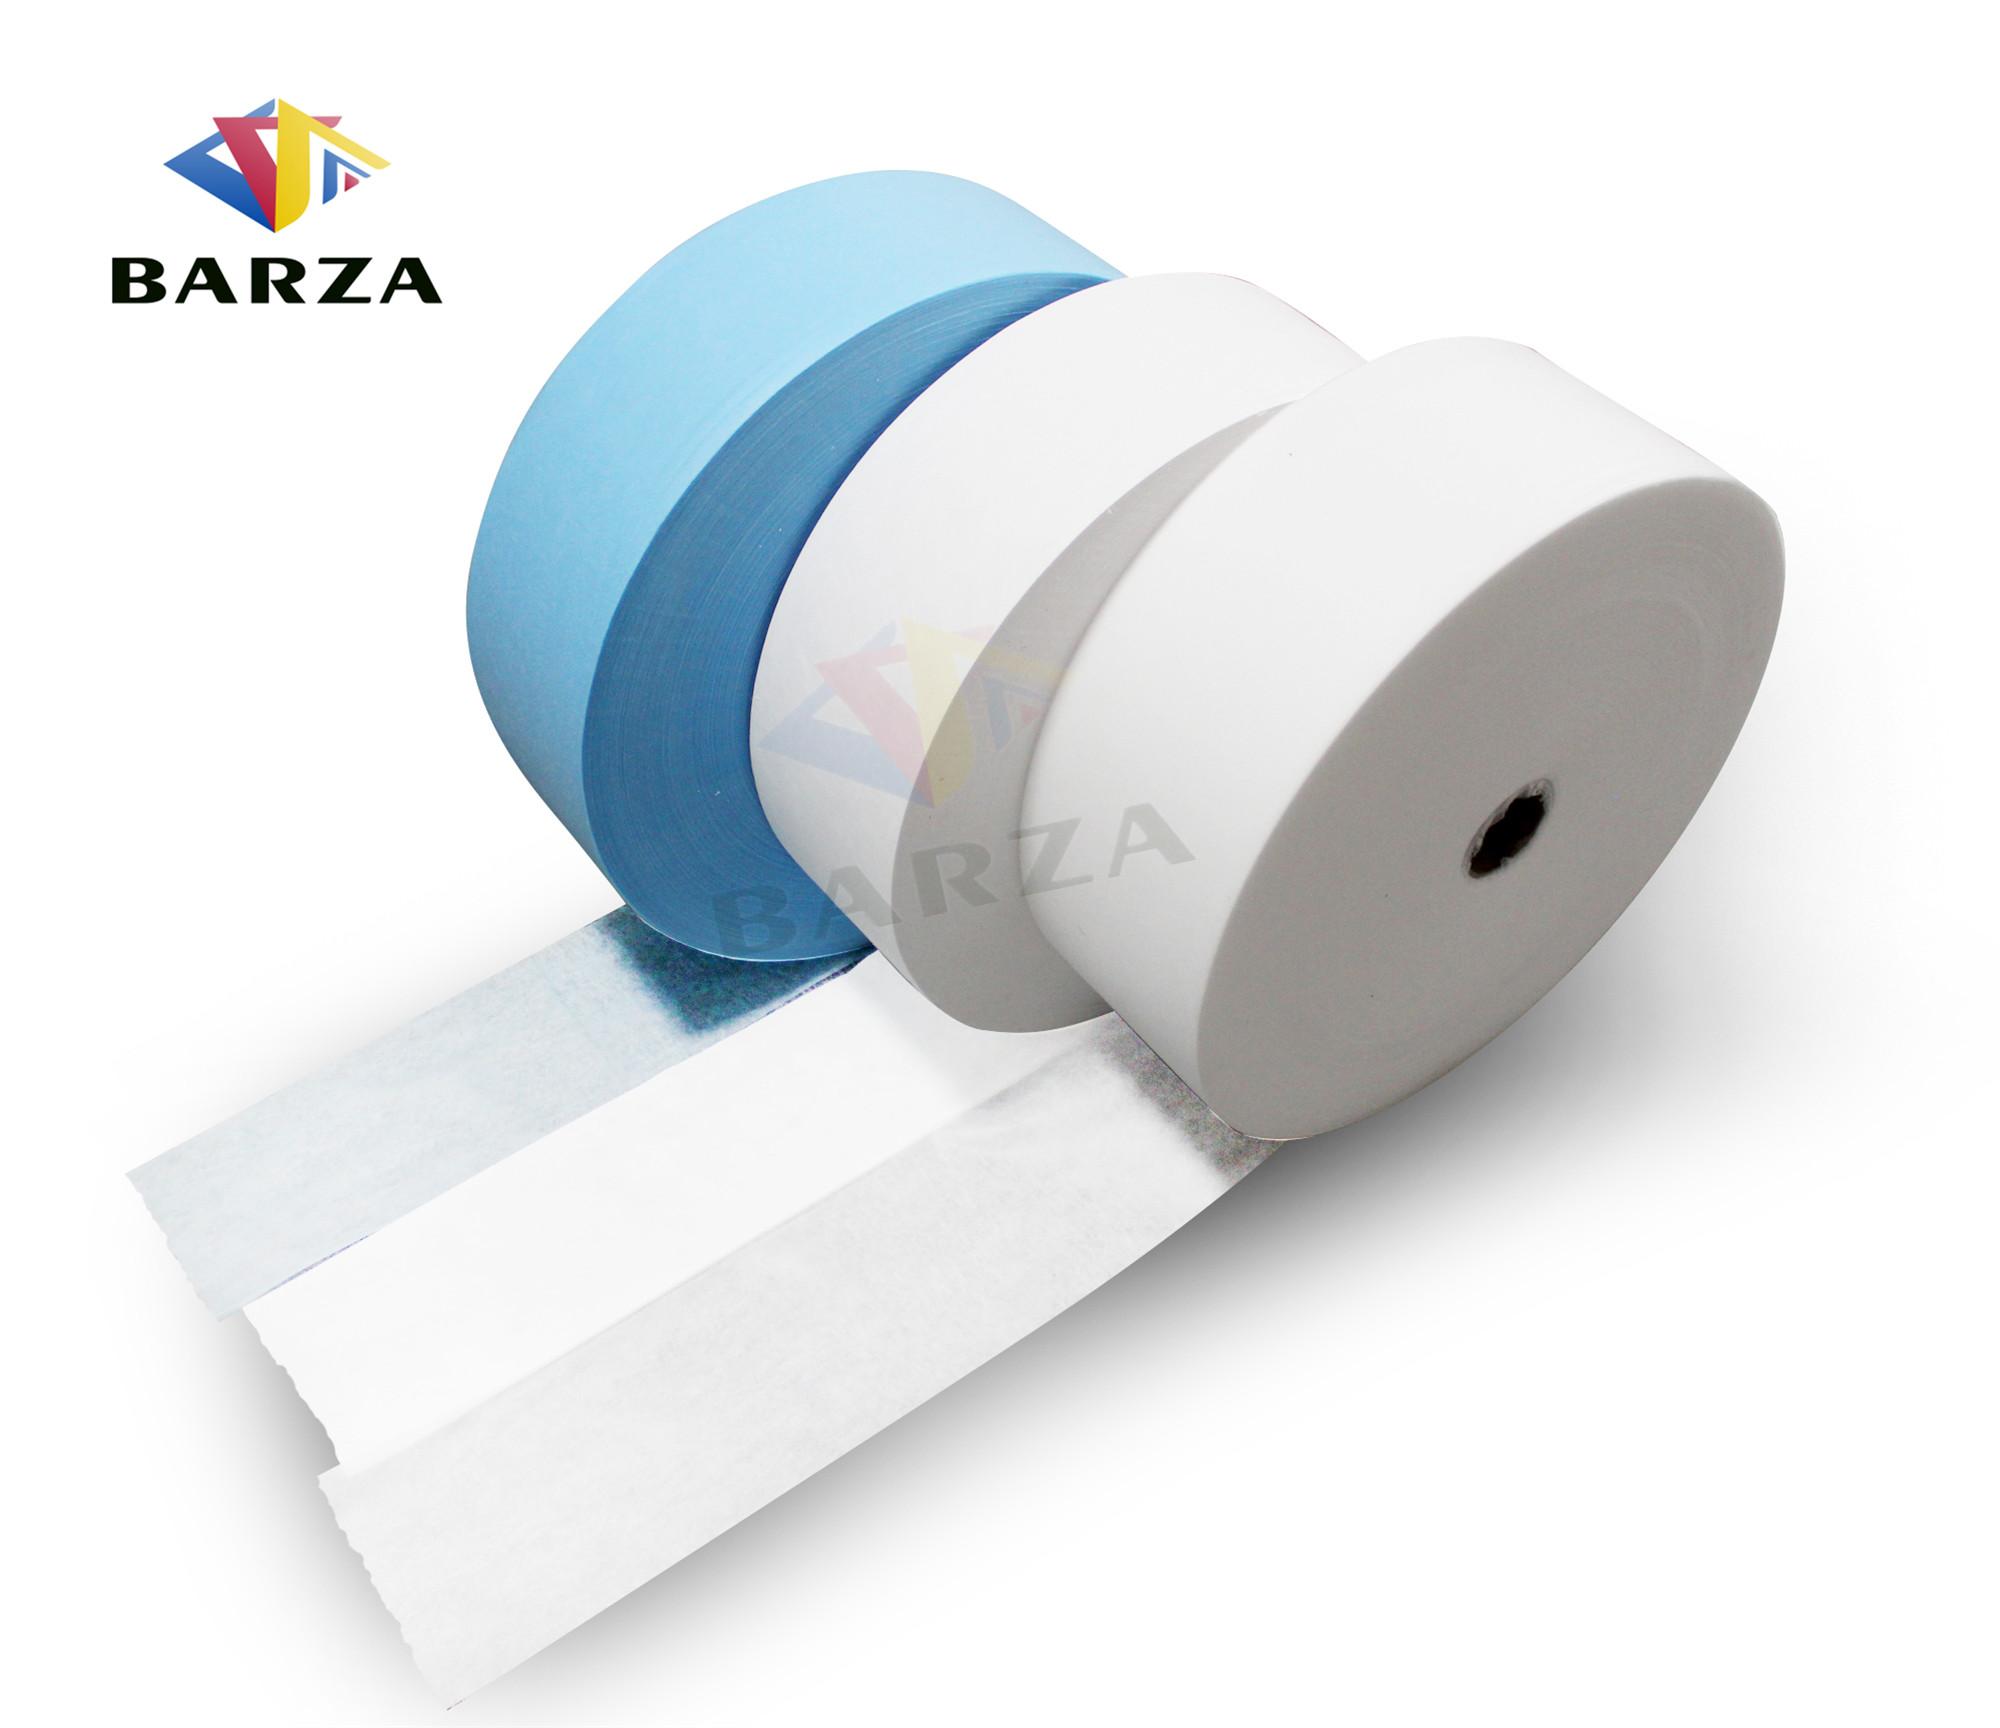 High Quality Nowoven Fabric 100% Pp Materials For Masks telas tnt